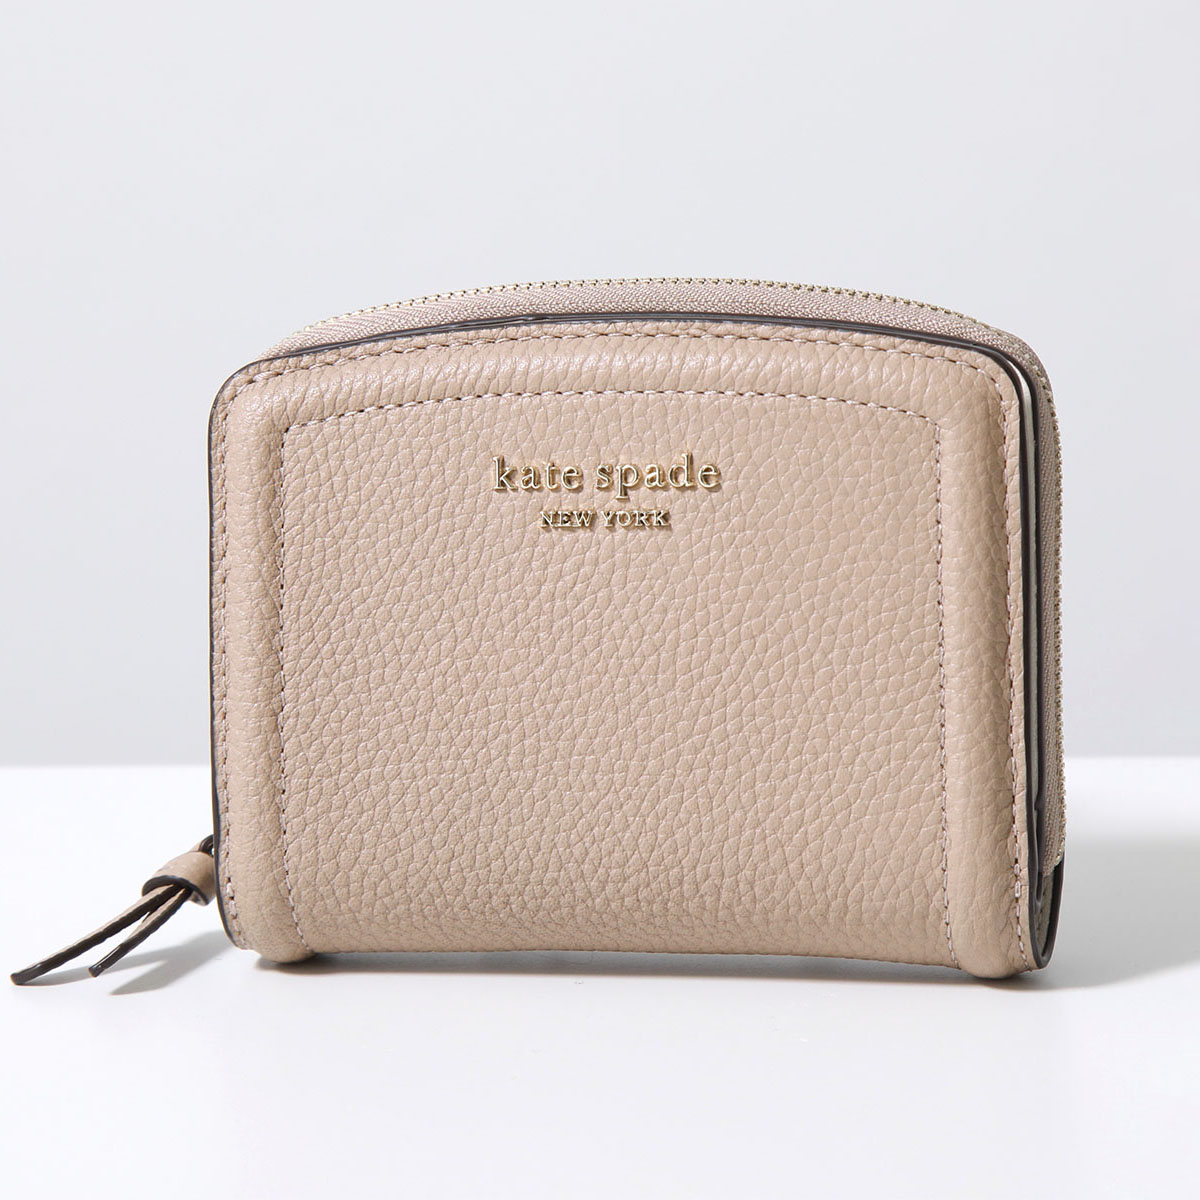 Kate spade ケイトスペード 二つ折り財布 Knott pebbled leather small compact wallet K5610 レディース レザー メタルロゴ カラー2色｜s-musee｜03